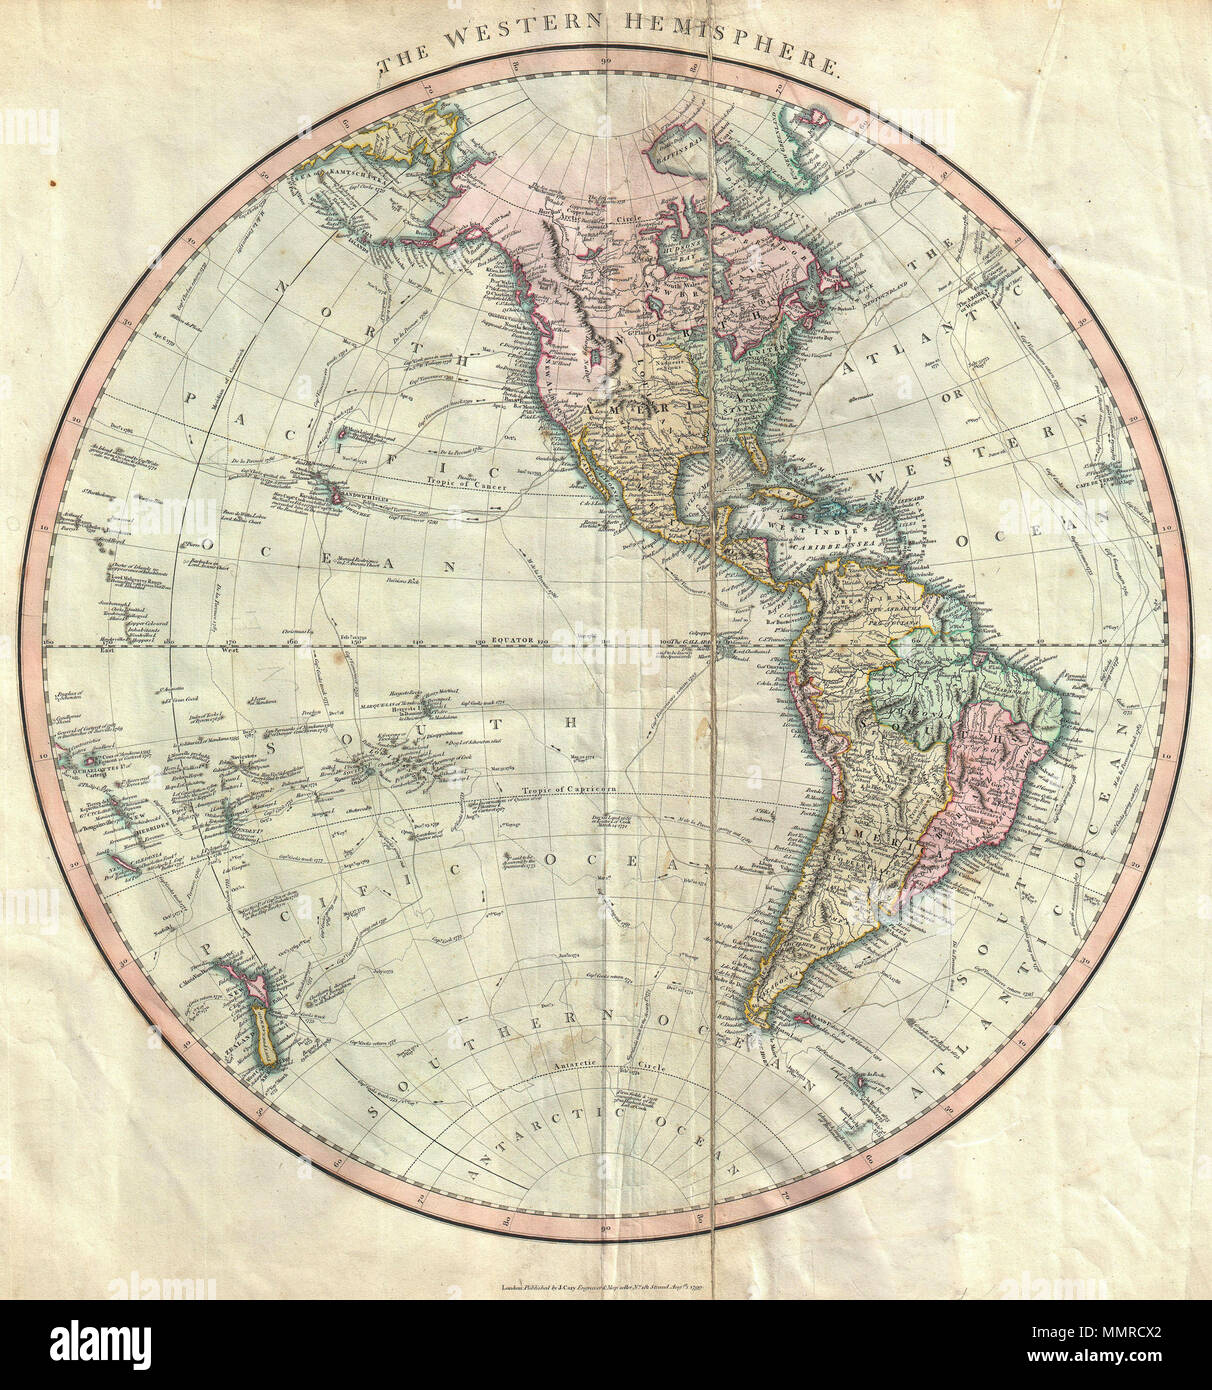 English: An attractive example of John Cary's spectacular 1799 map of the  Western Hemisphere. Covers the entirety of North America, South America,  the Pacific Ocean and much of Polynesia. Europe is